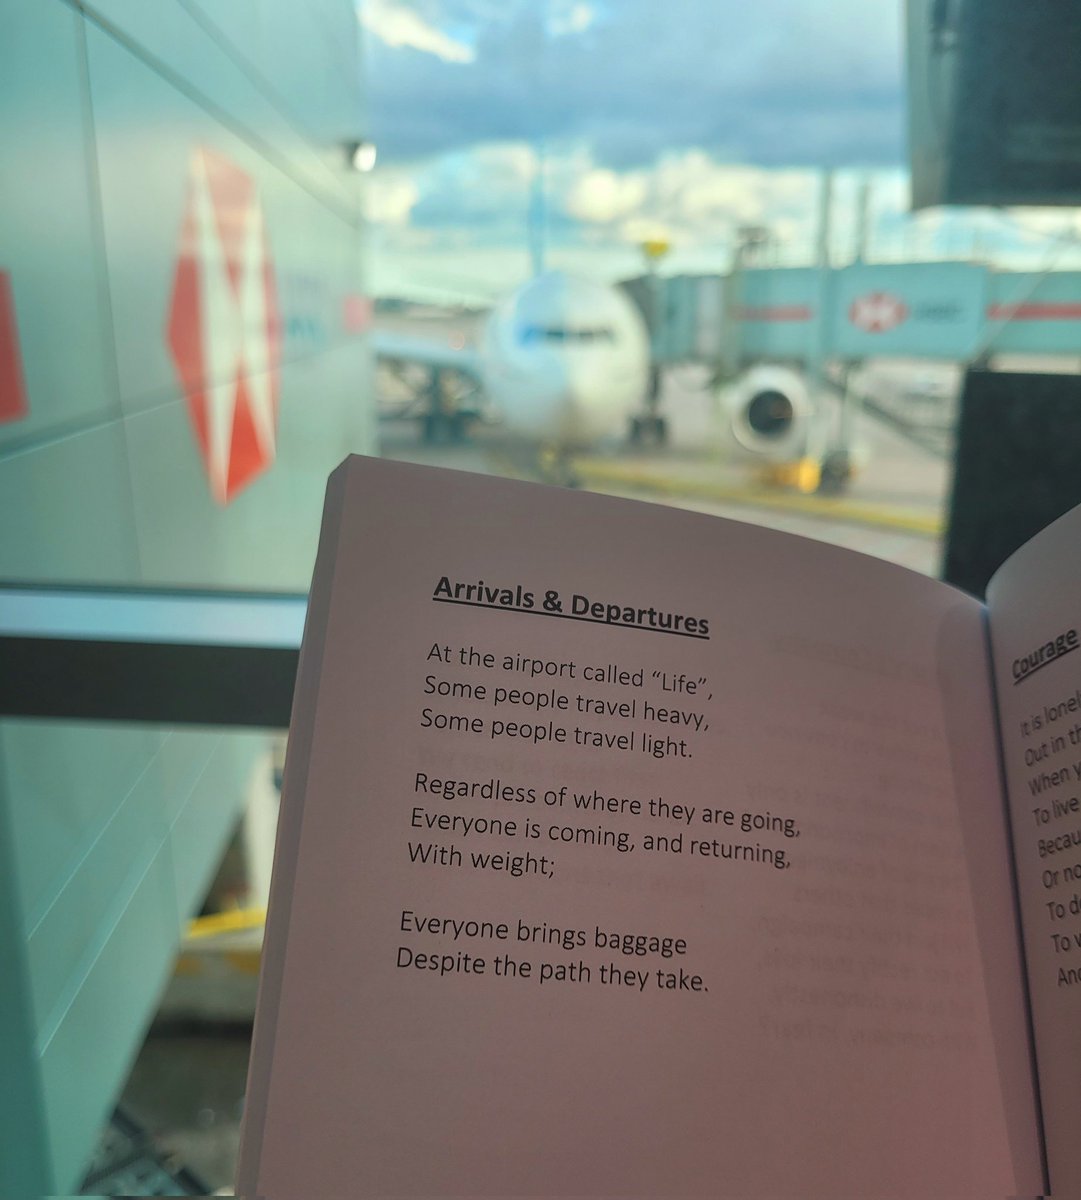 'Anthropology of the Unsuccessful' : Arrivals & Departures

#poetry #prose #canadianwriters  

@Canadian_Poetry @RealisticPoetry @Poetry_Daily @poetswritersinc @BestCdnPoetry @Poetry_Society